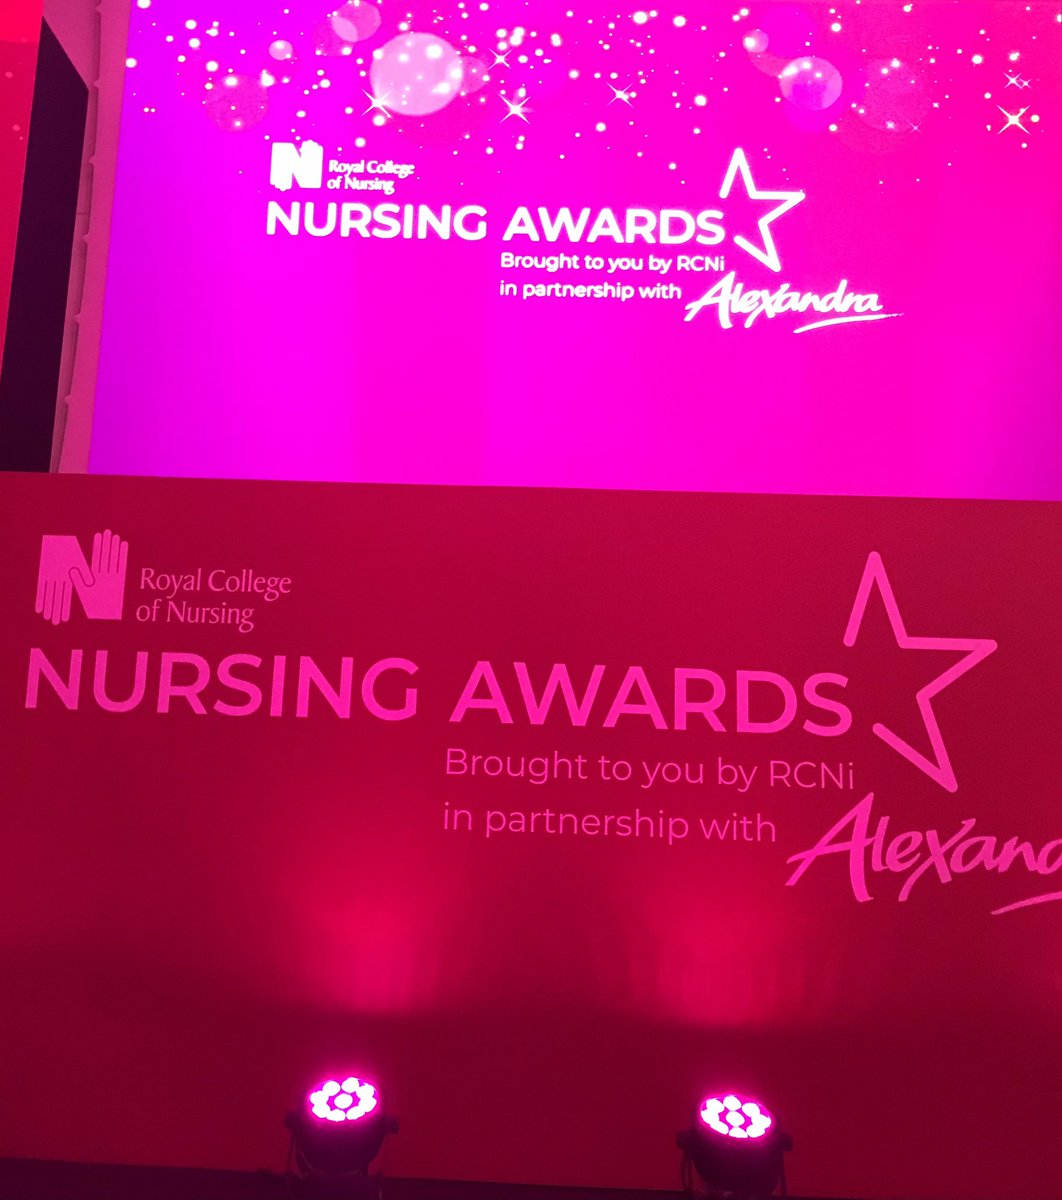 Pleased to be at @theRCN awards celebrating the very best in nursing - looking forward to presenting @nmcnews sponsored award for innovations in your specialty. Congratulations & good luck to all finalists 👏🌟👏